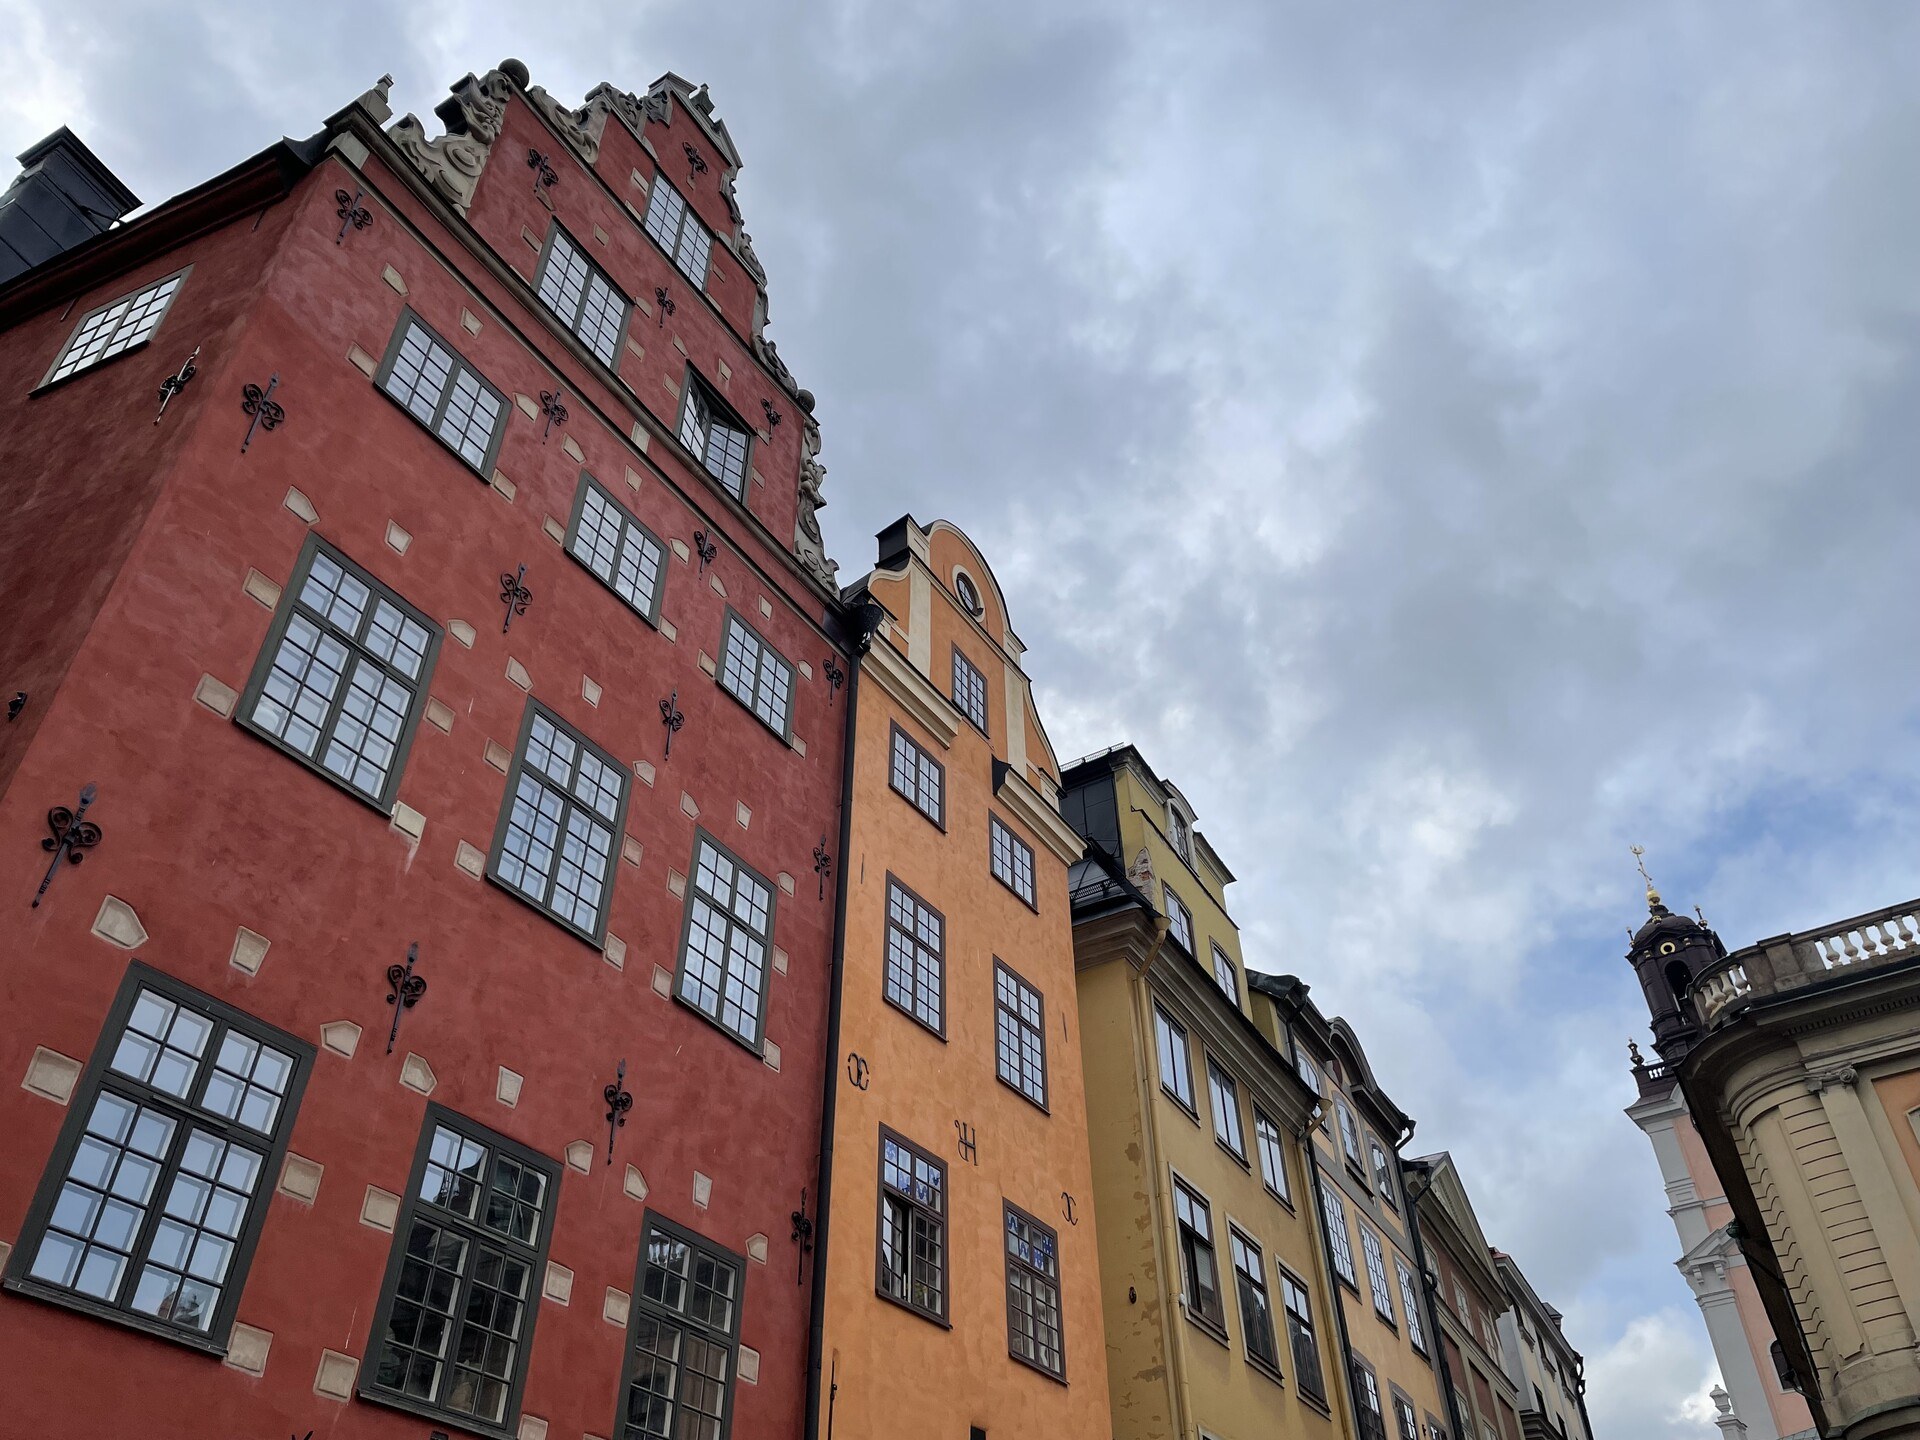 Looking up at the multicoloured facades of old terraced buildings in Gamla Stan, with an overcast sky beyond